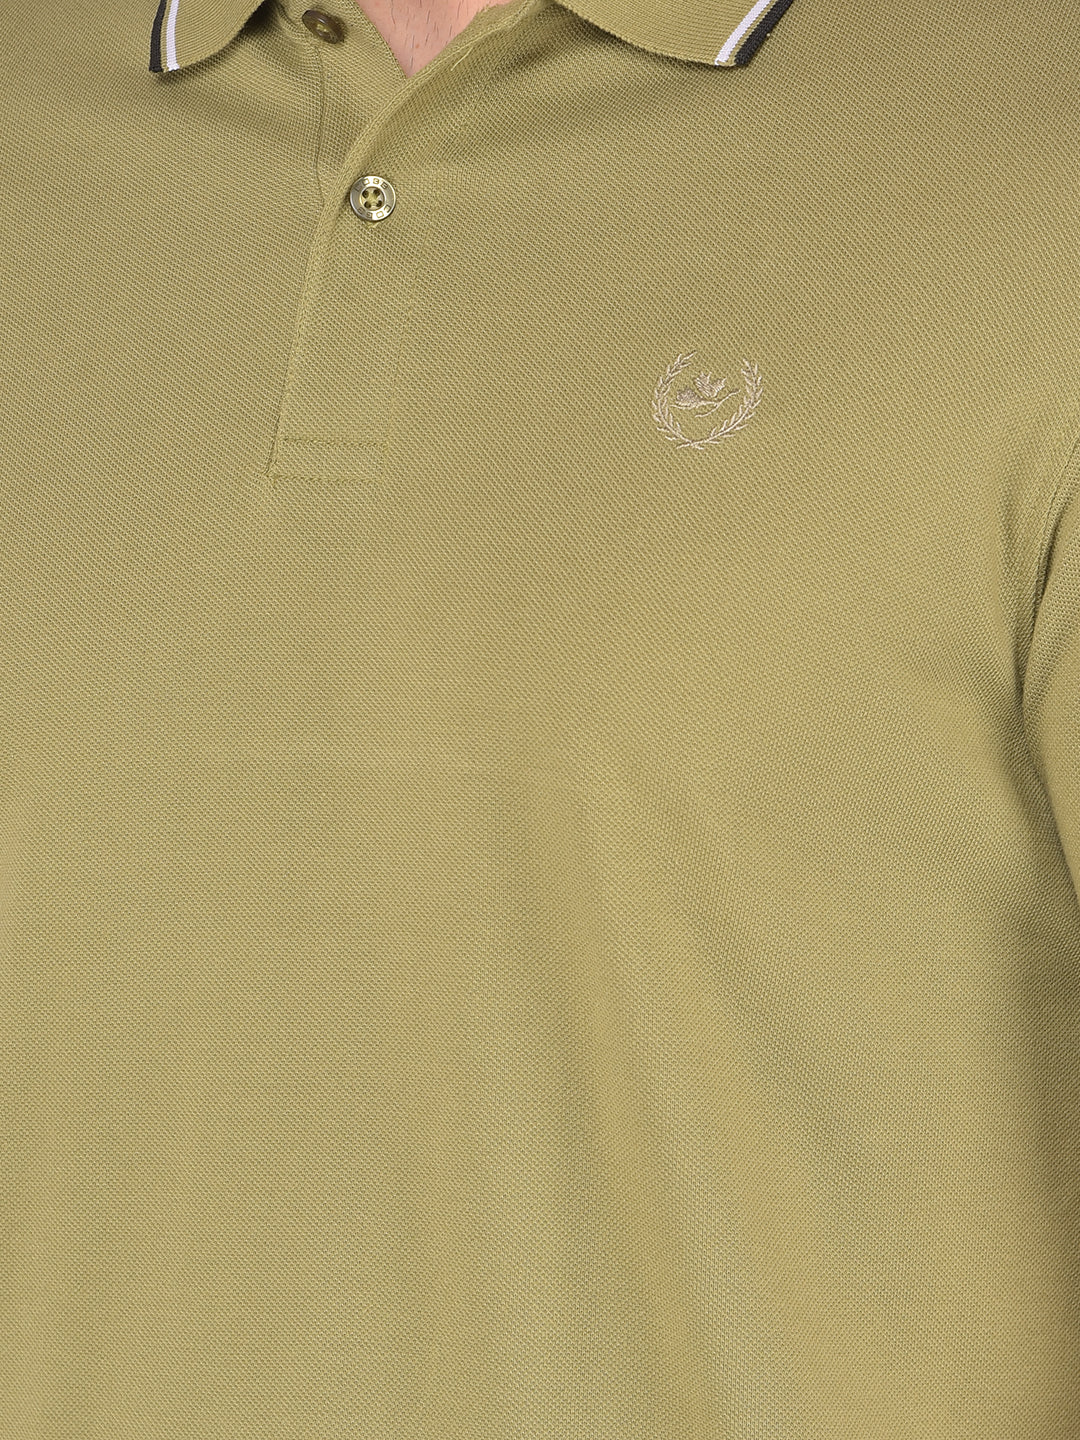 COBB SOLID OLIVE GREEN POLO NECK T-SHIRT